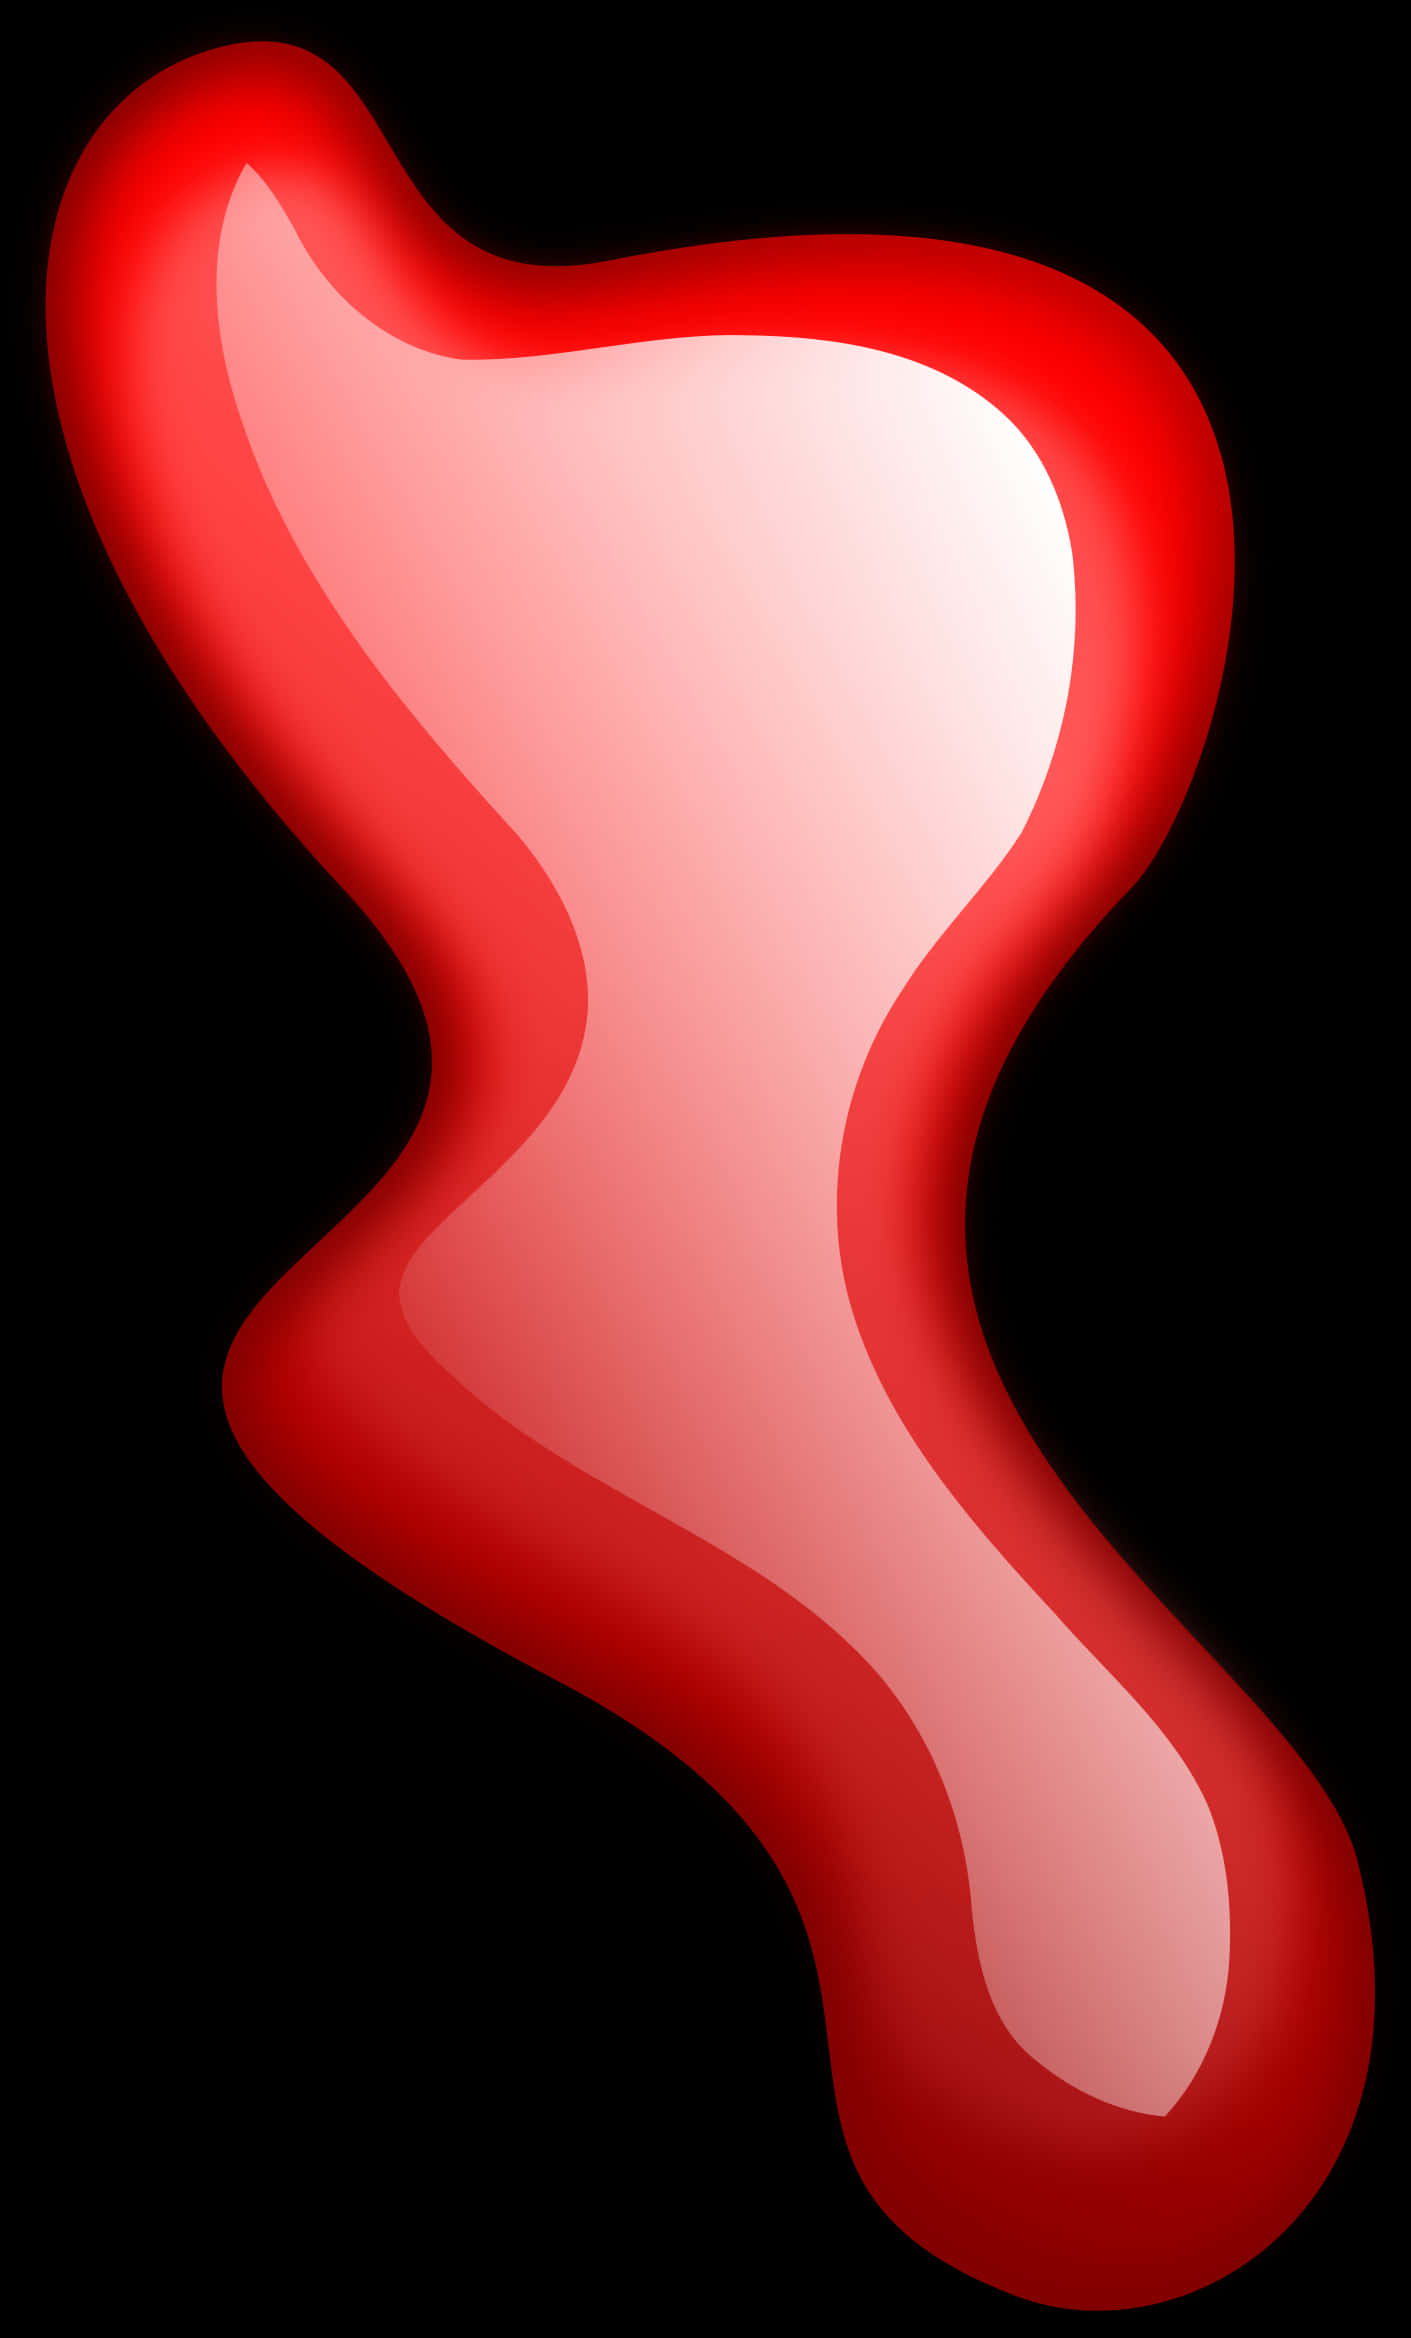 Abstract Blood Drop Illustration